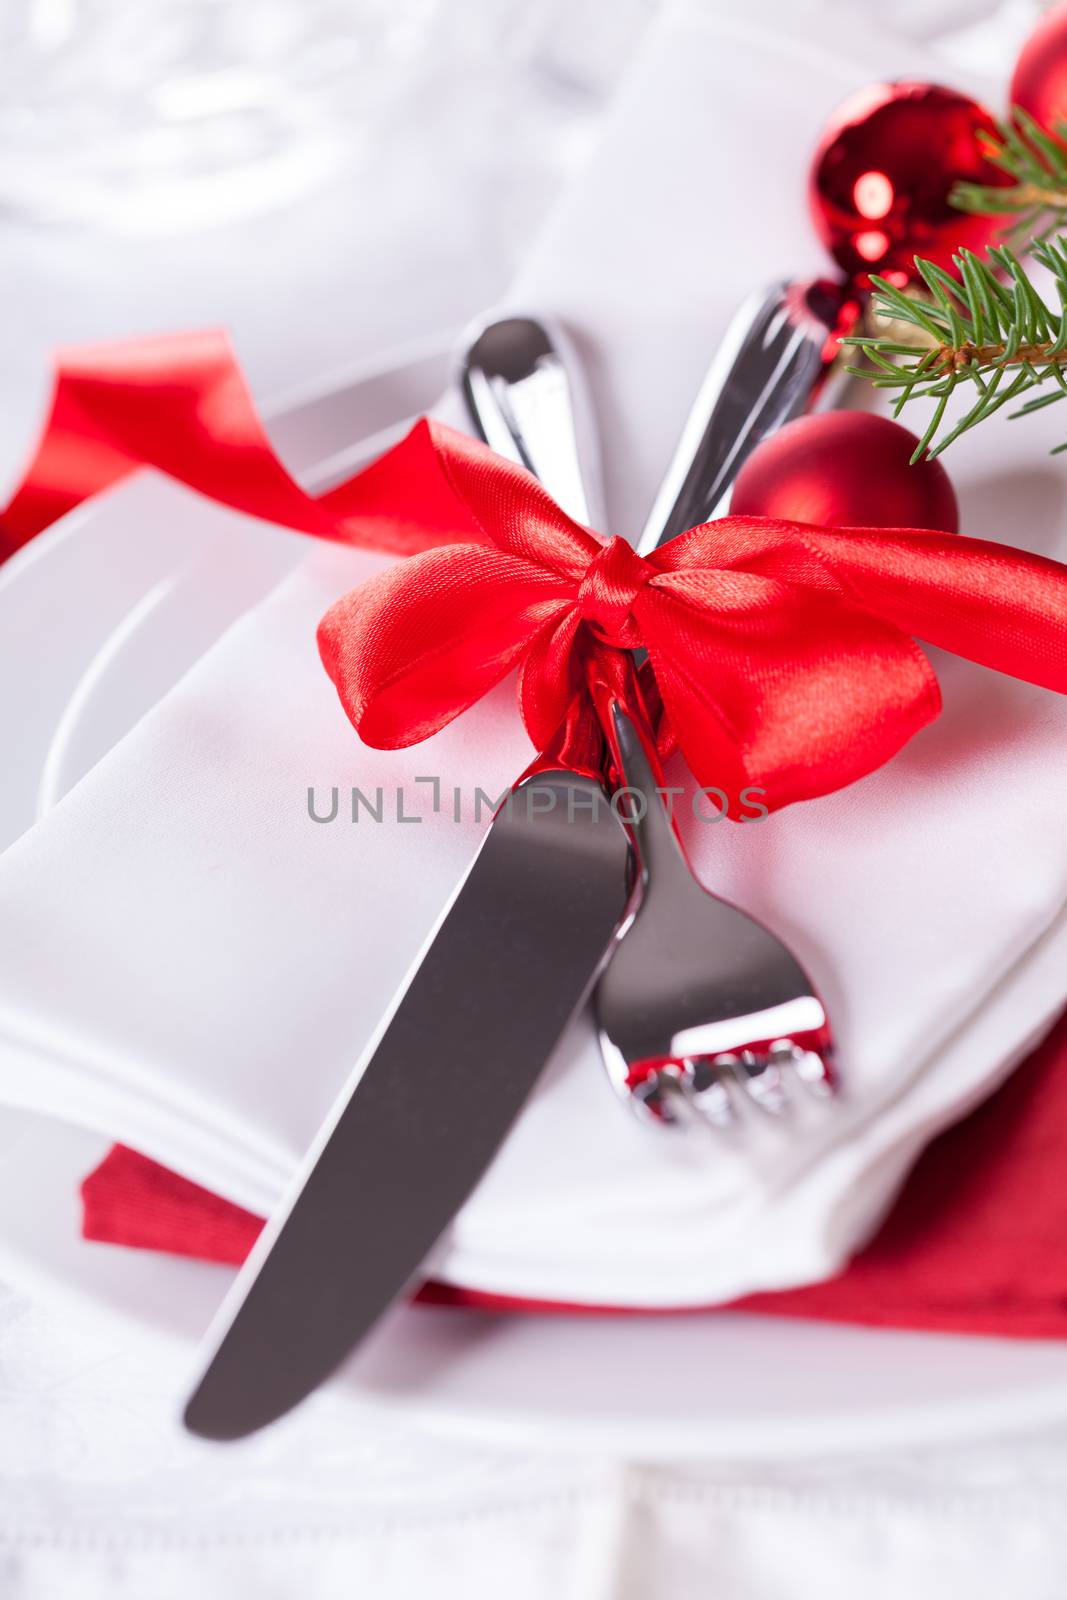 Romantic red Christmas table setting by juniart